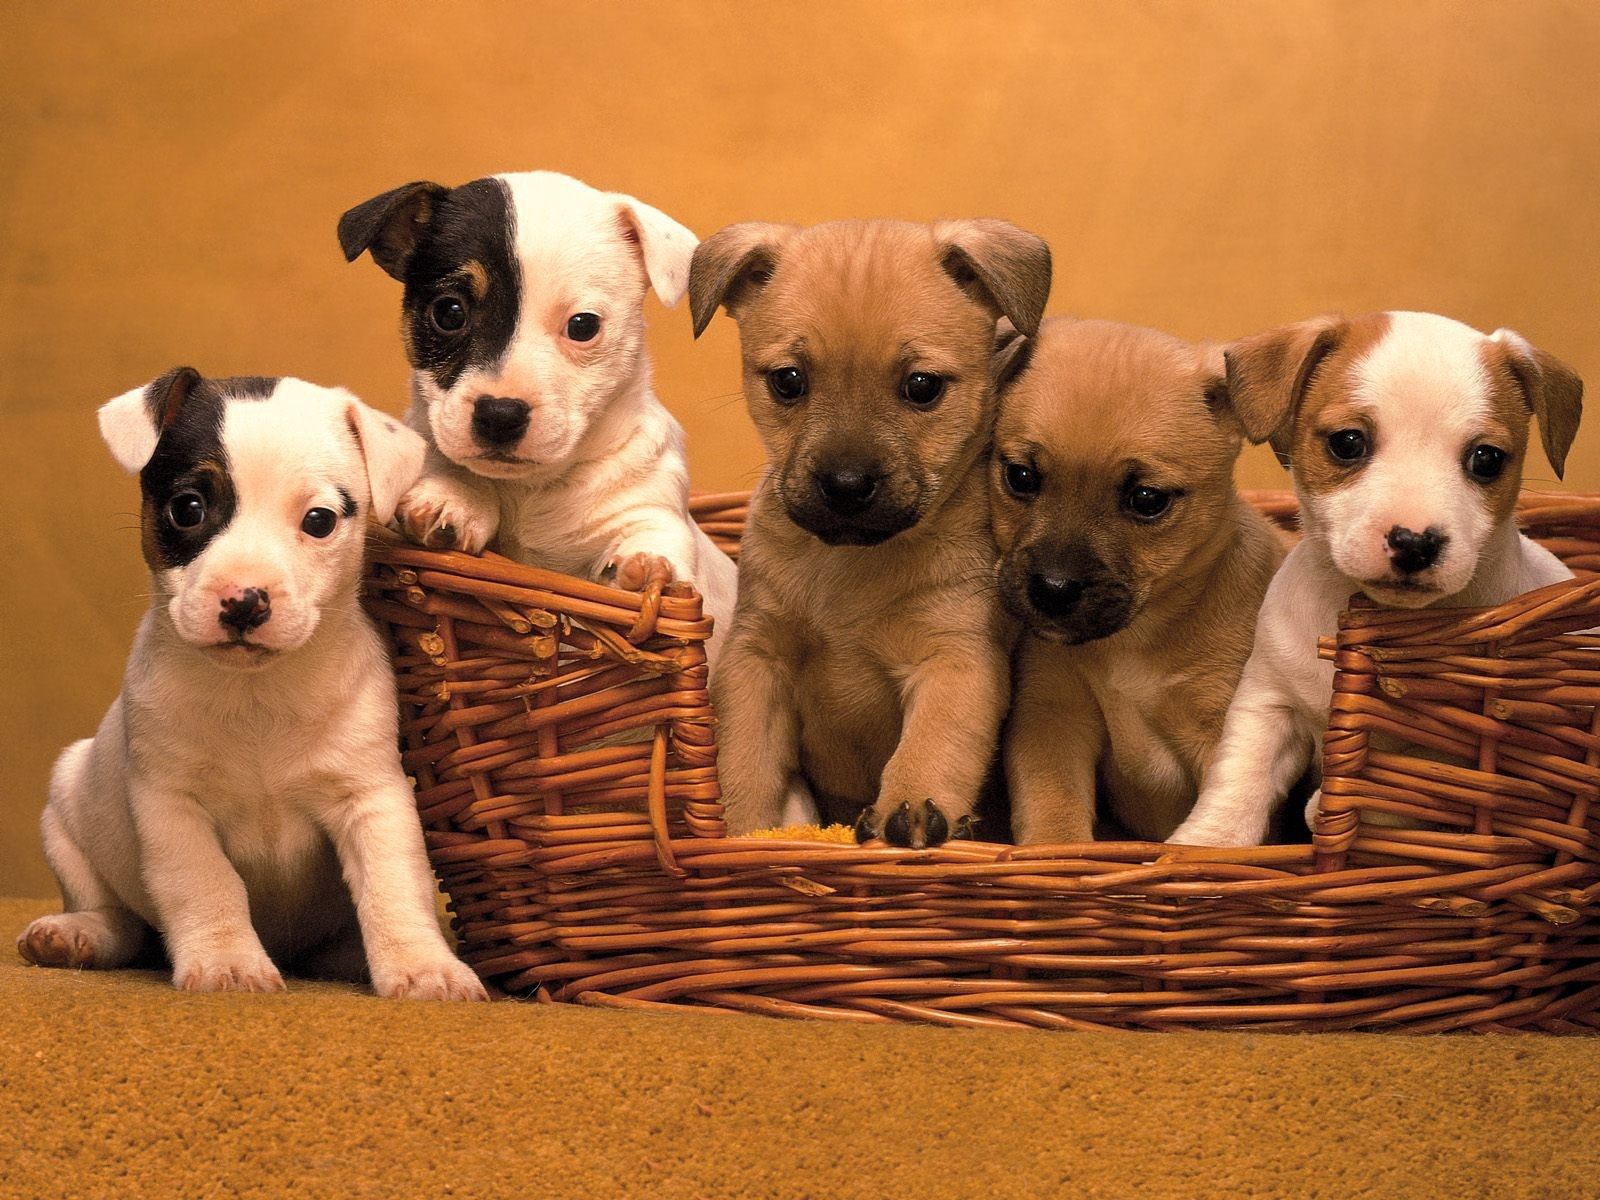 puppies, animals, muzzle, basket, lots of, multitude wallpapers for tablet